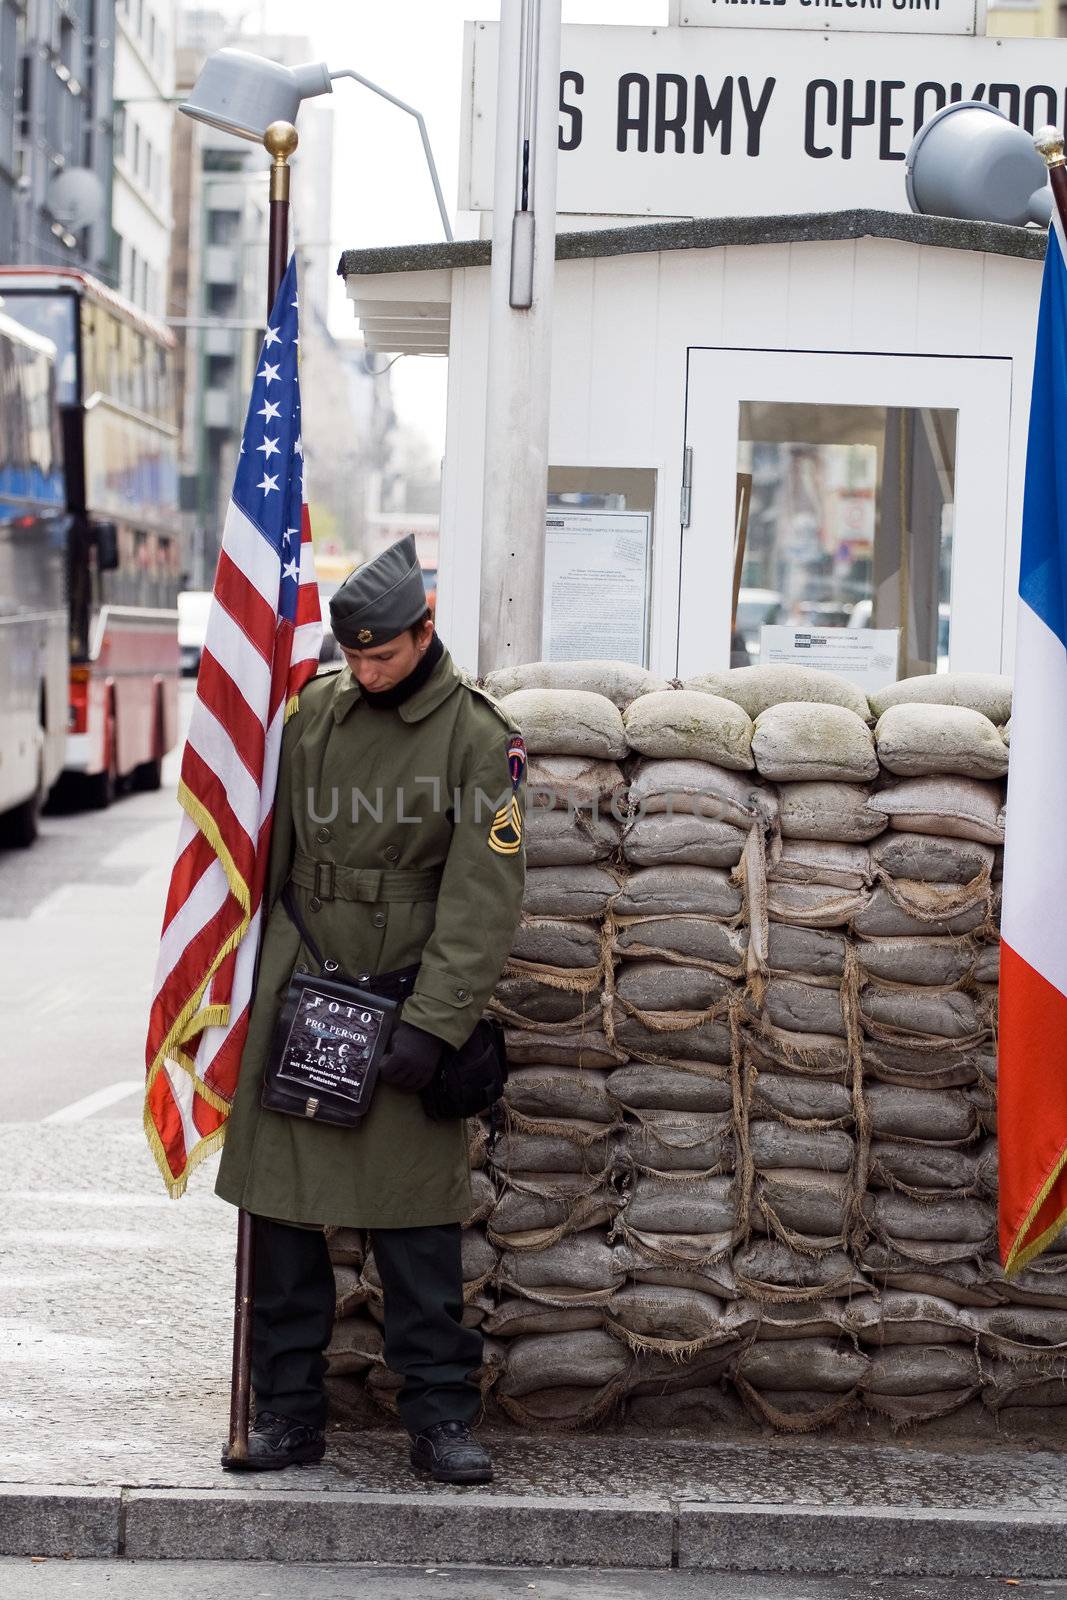 Soldier with American flag at Checkpoint Charlie. Berlin, Germany, april 14, 2008